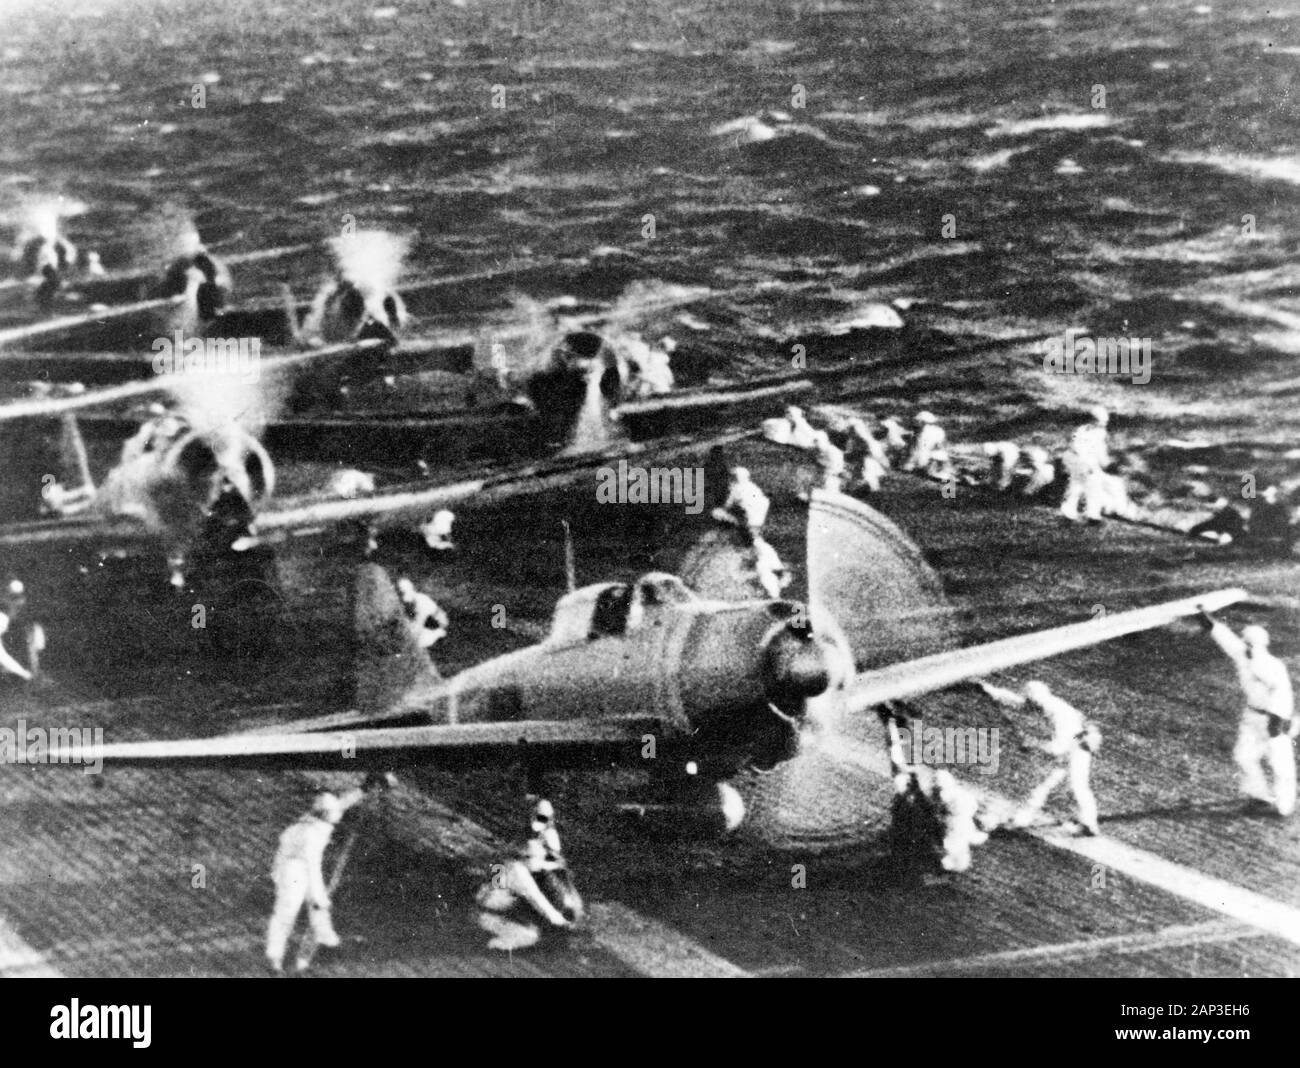 Pearl Harbor Attack, 7 December 1941. Japanese naval aircraft prepare to take off from an aircraft carrier (reportedly Shokaku) to attack Pearl Harbor during the morning of 7 December 1941. Plane in the foreground is a 'Zero' Fighter, in front of 'Val' dive bombers. This is probably the launch of the second attack wave. Stock Photo